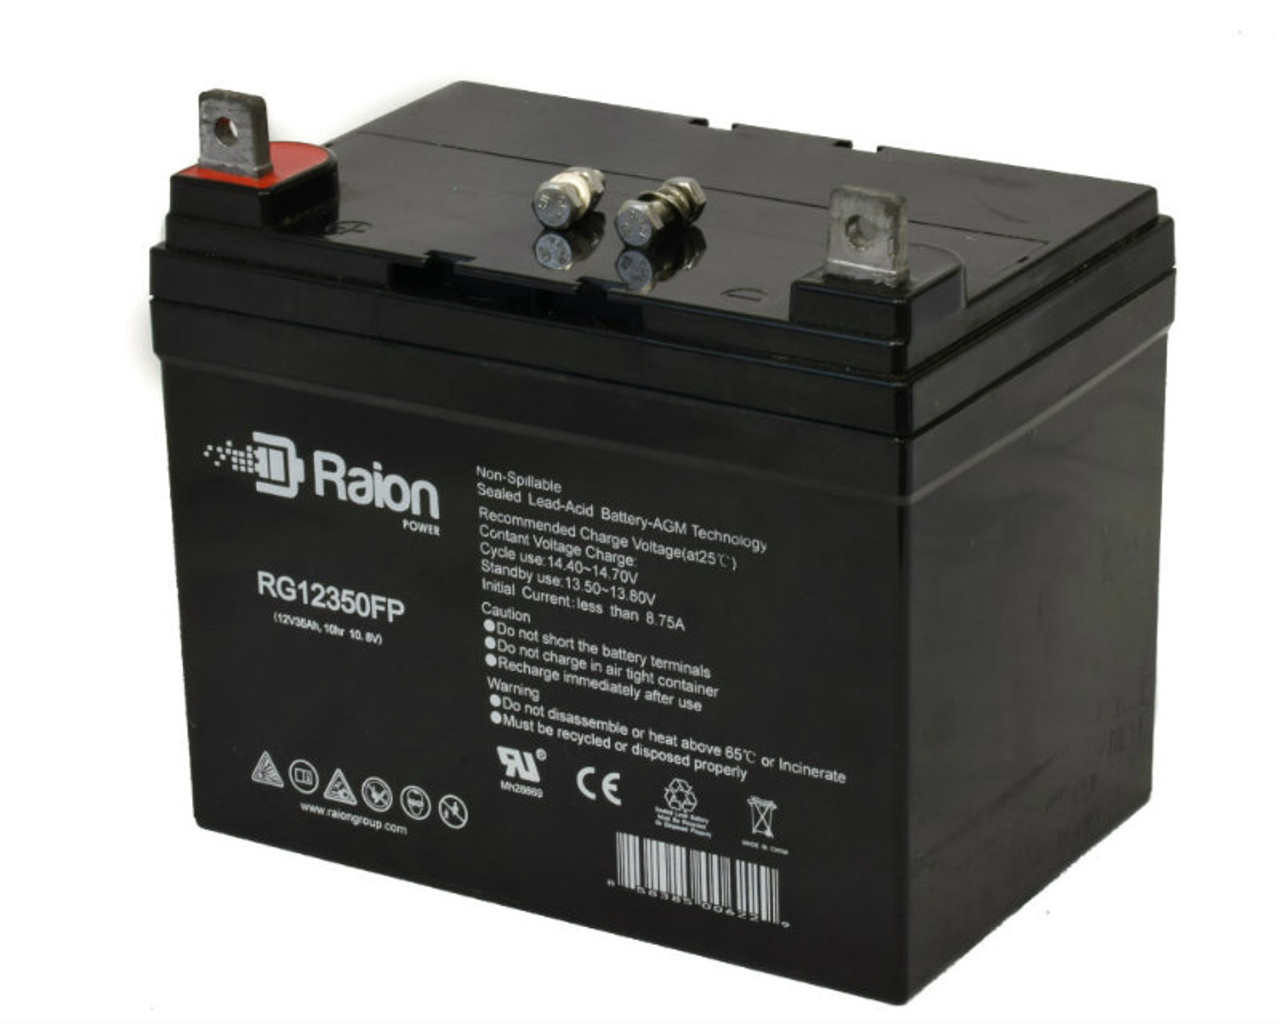 Raion Power Replacement 12V 35Ah RG12350FP Mobility Scooter Battery for Merits Health Products Travel-Ease Regal P318